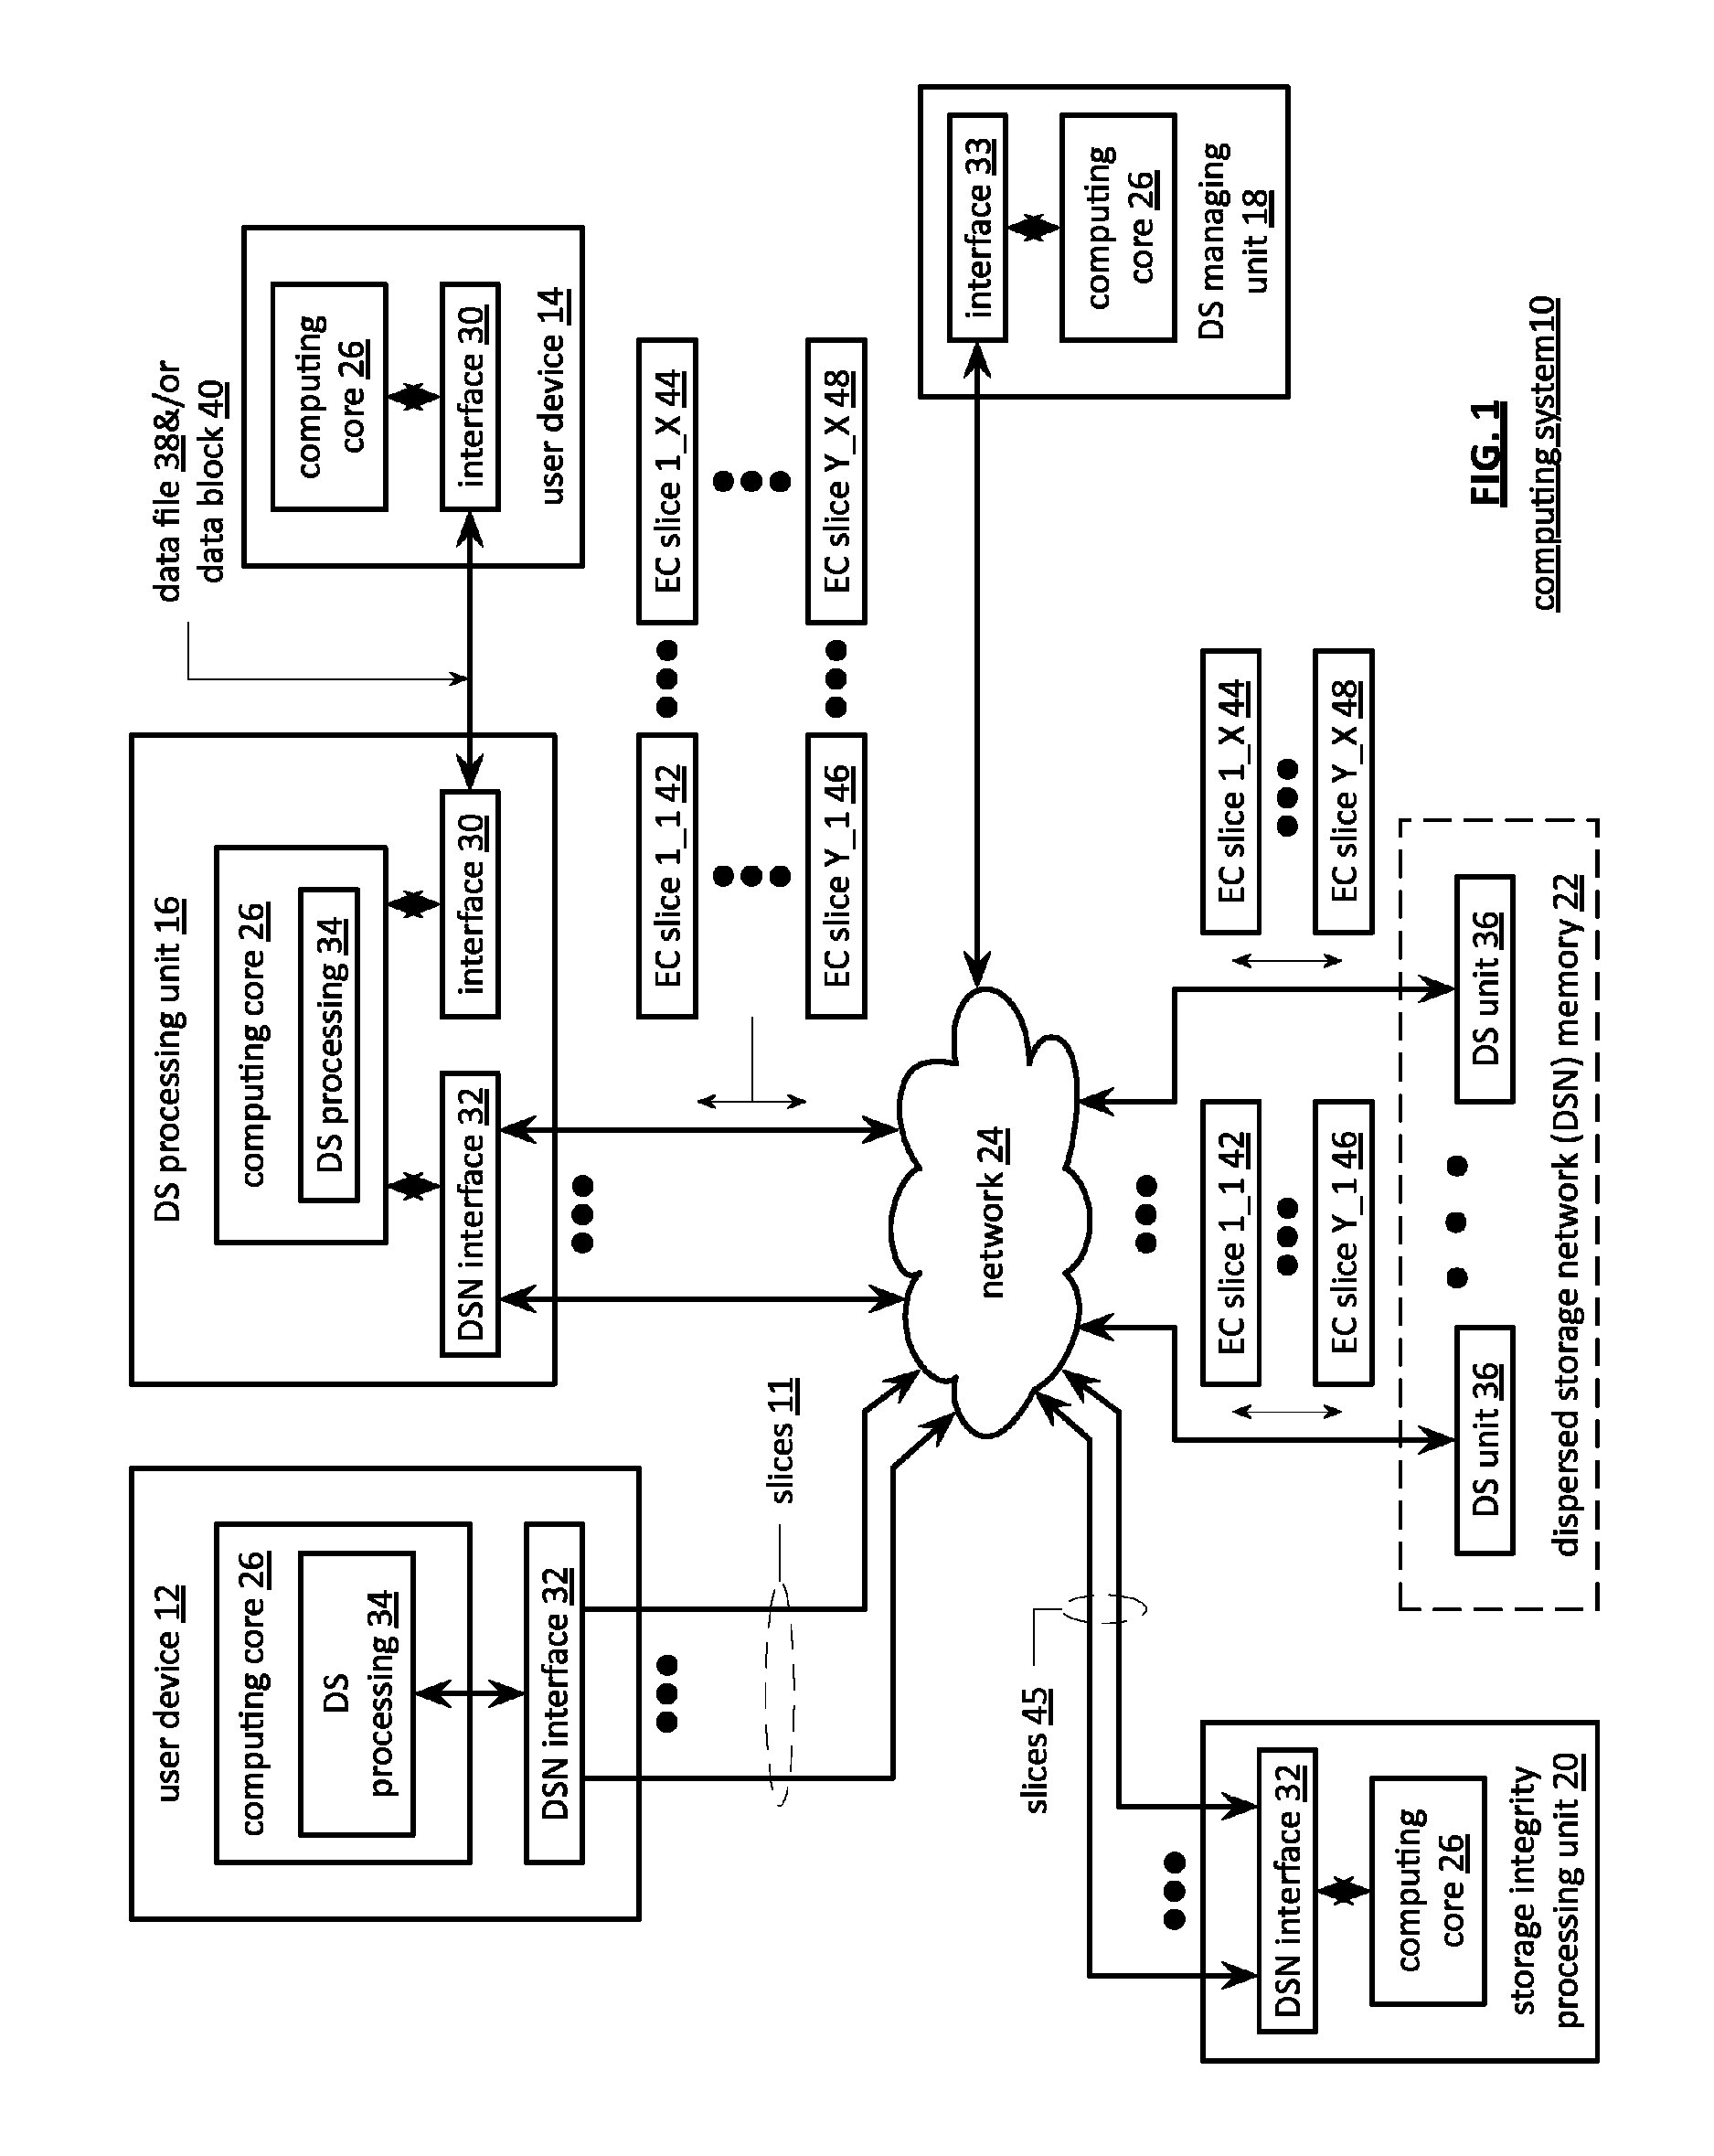 Migrating encoded data slices from a re-provisioned memory device of a dispersed storage network memory